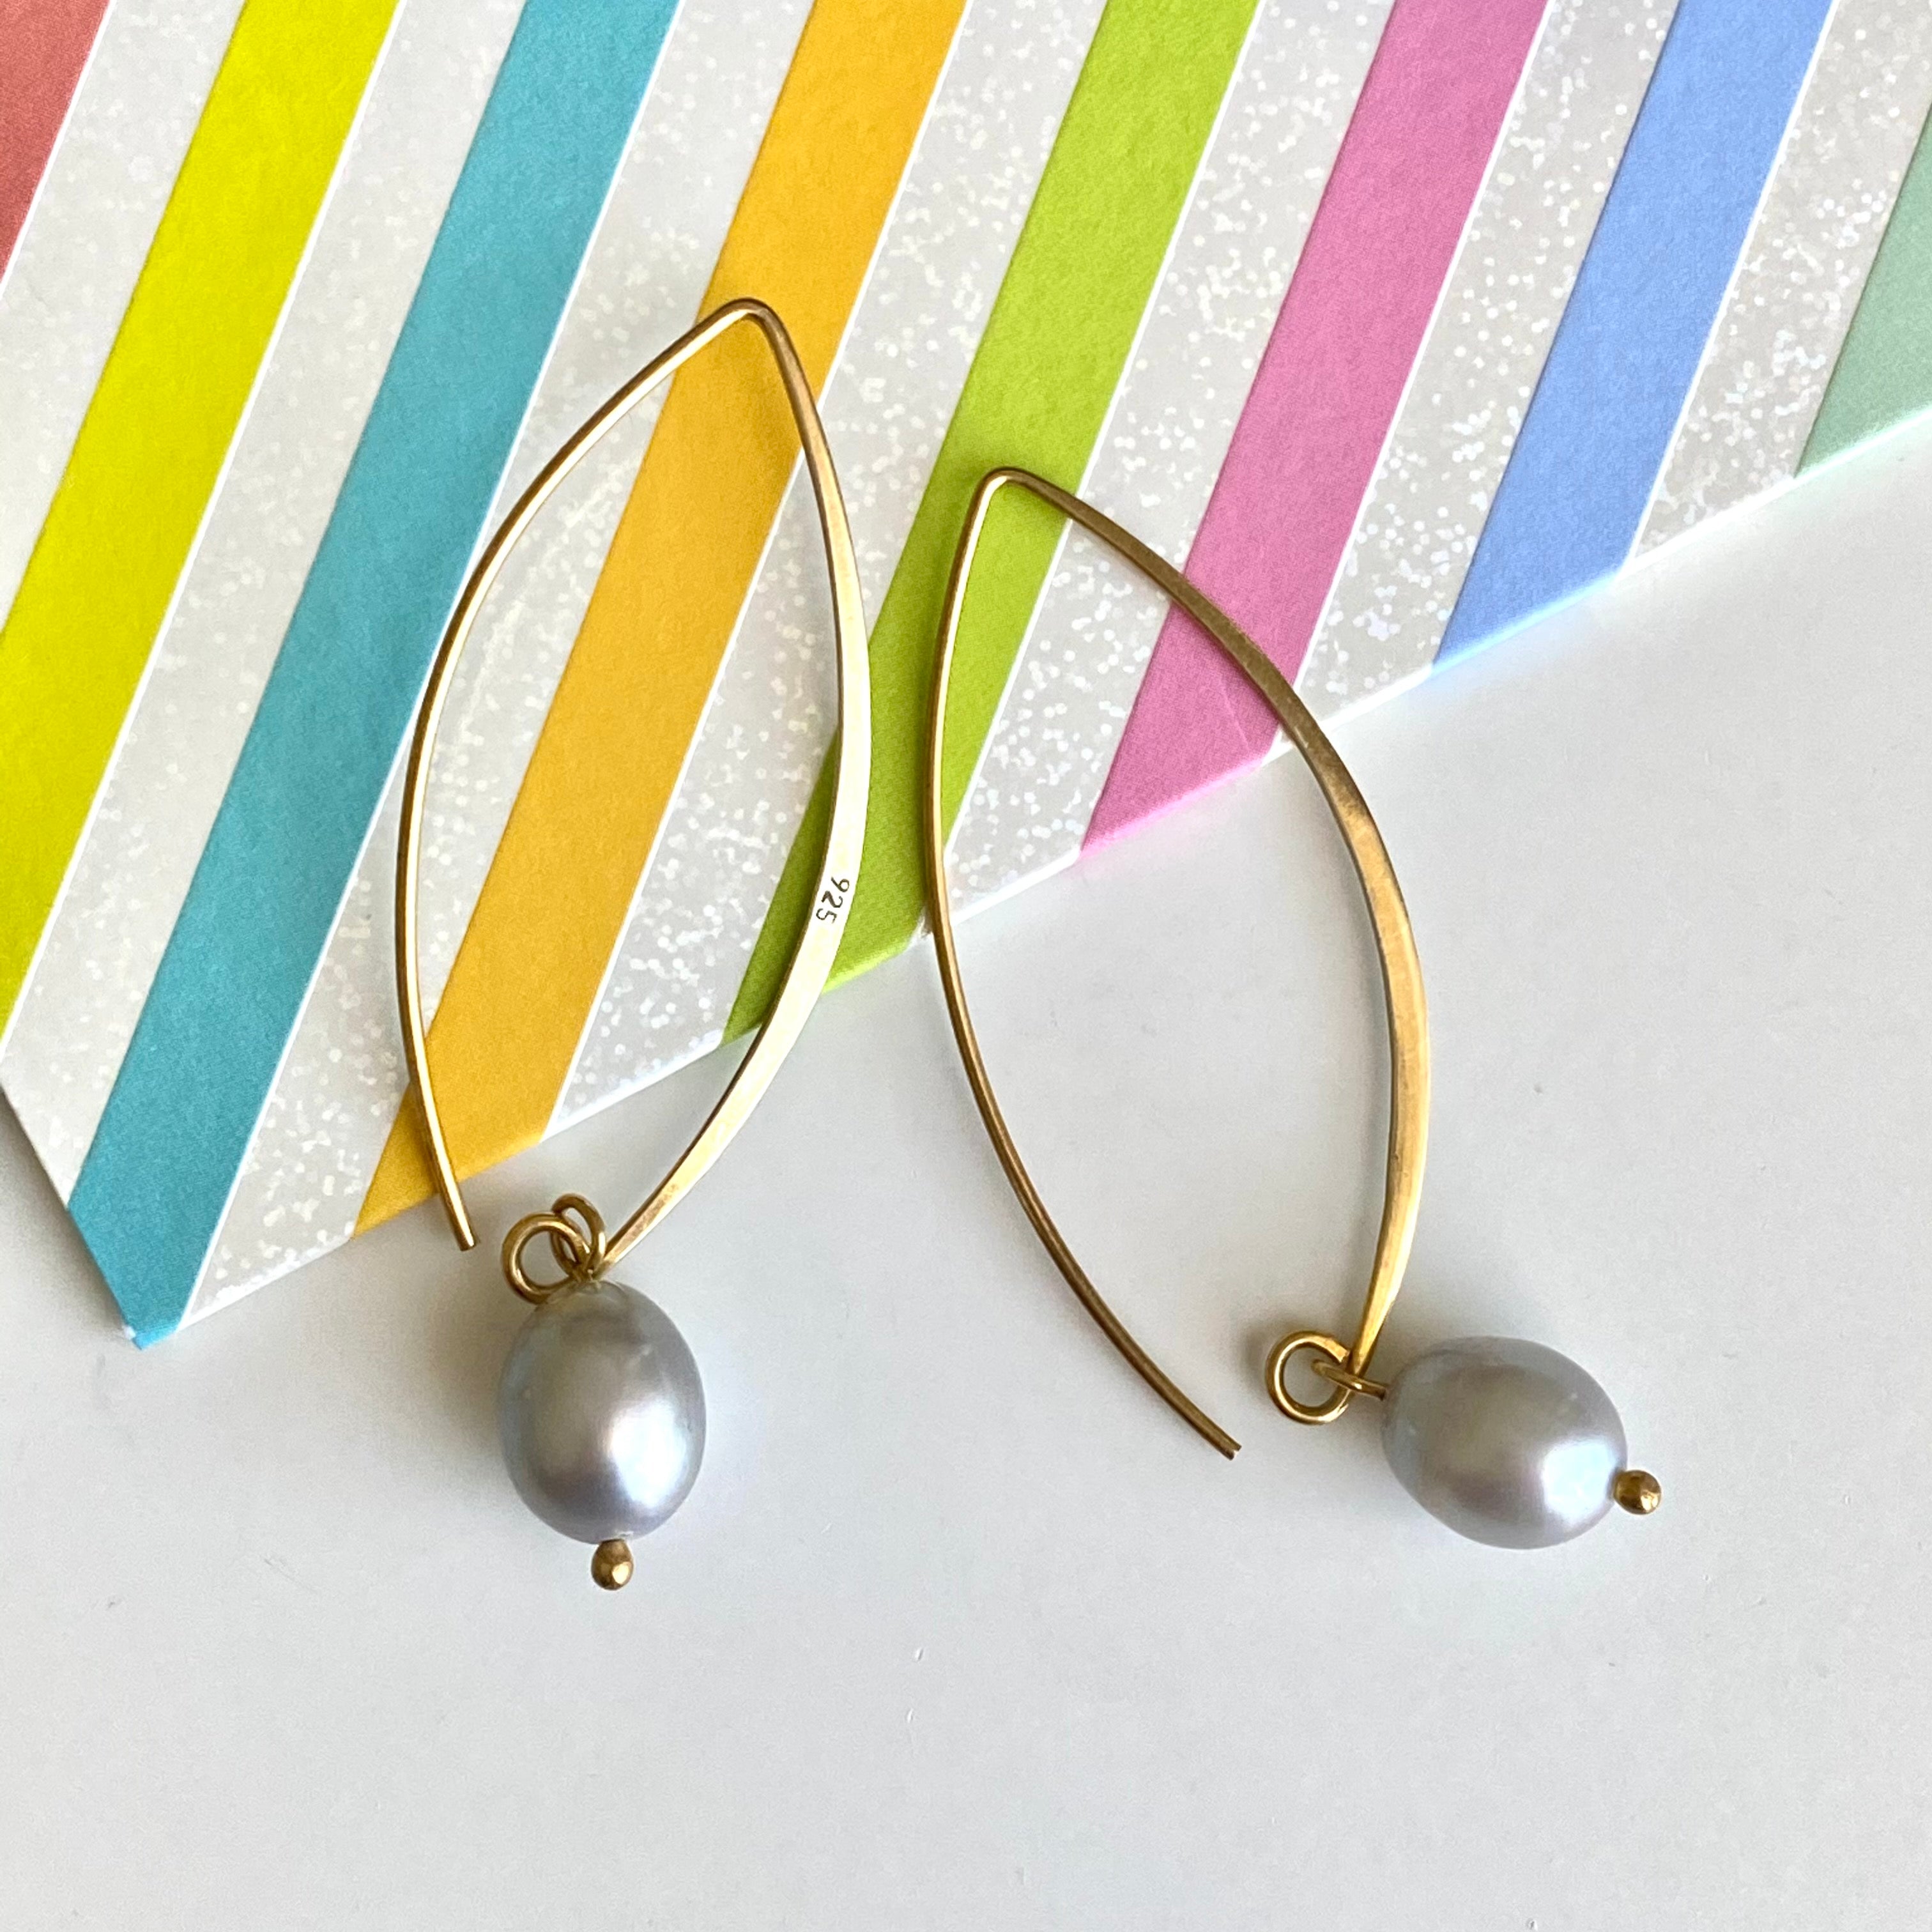 Gold Plated Long Sterling Silver Threader Earrings with Grey Pearl Drop